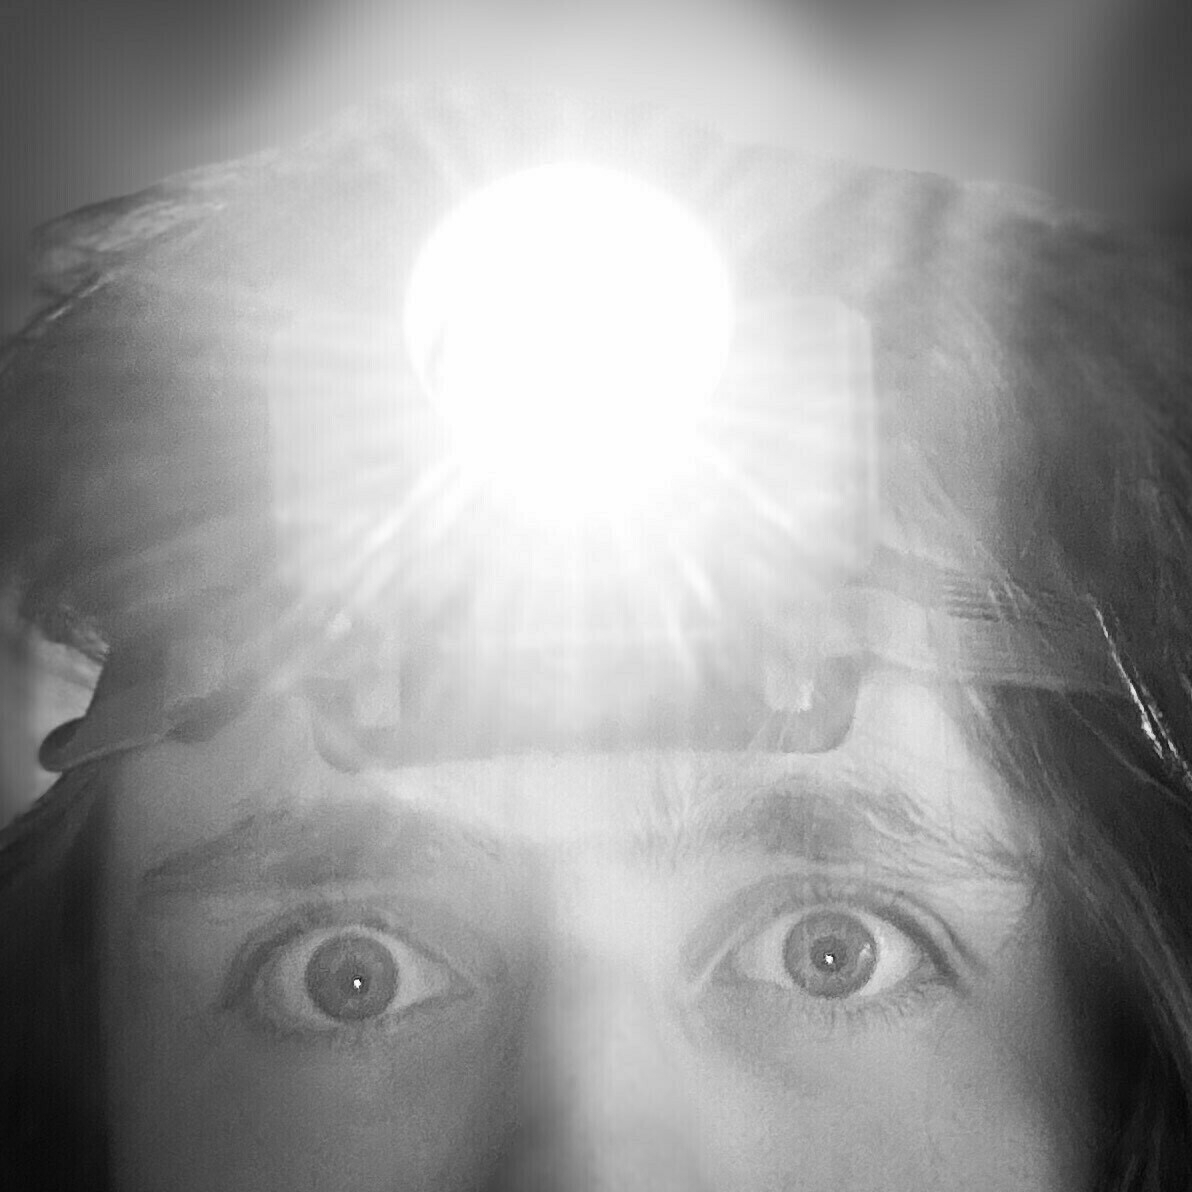 Close-up of a person's eyes with a bright light on their forehead, possibly from a headlamp, in black and white.